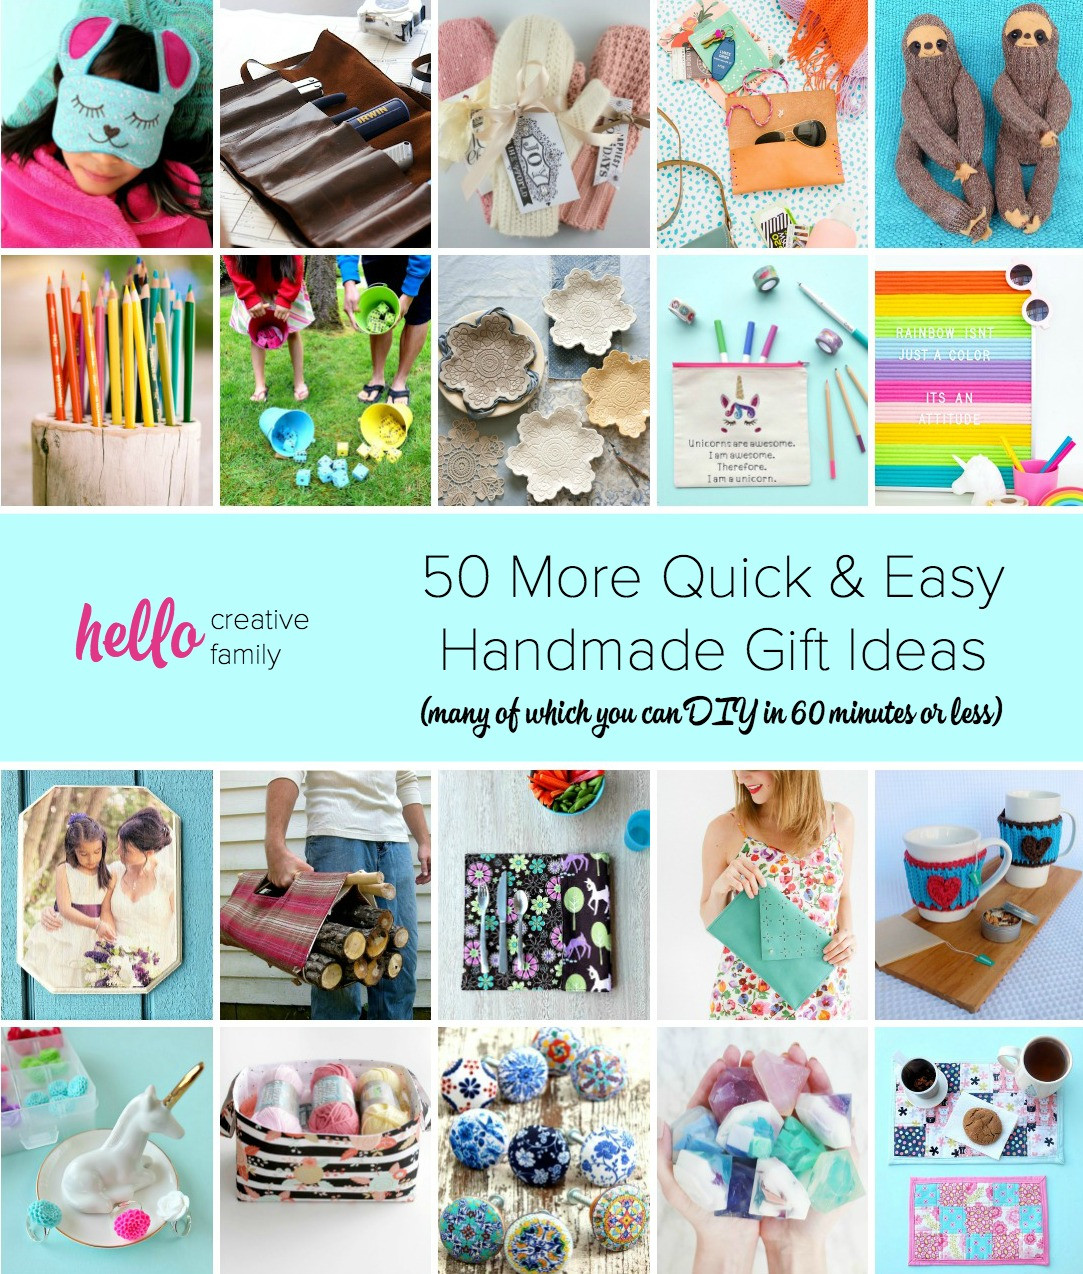 Last Minute DIY Birthday Gifts
 50 Last Minute Handmade Gifts You Can DIY in 60 Minutes